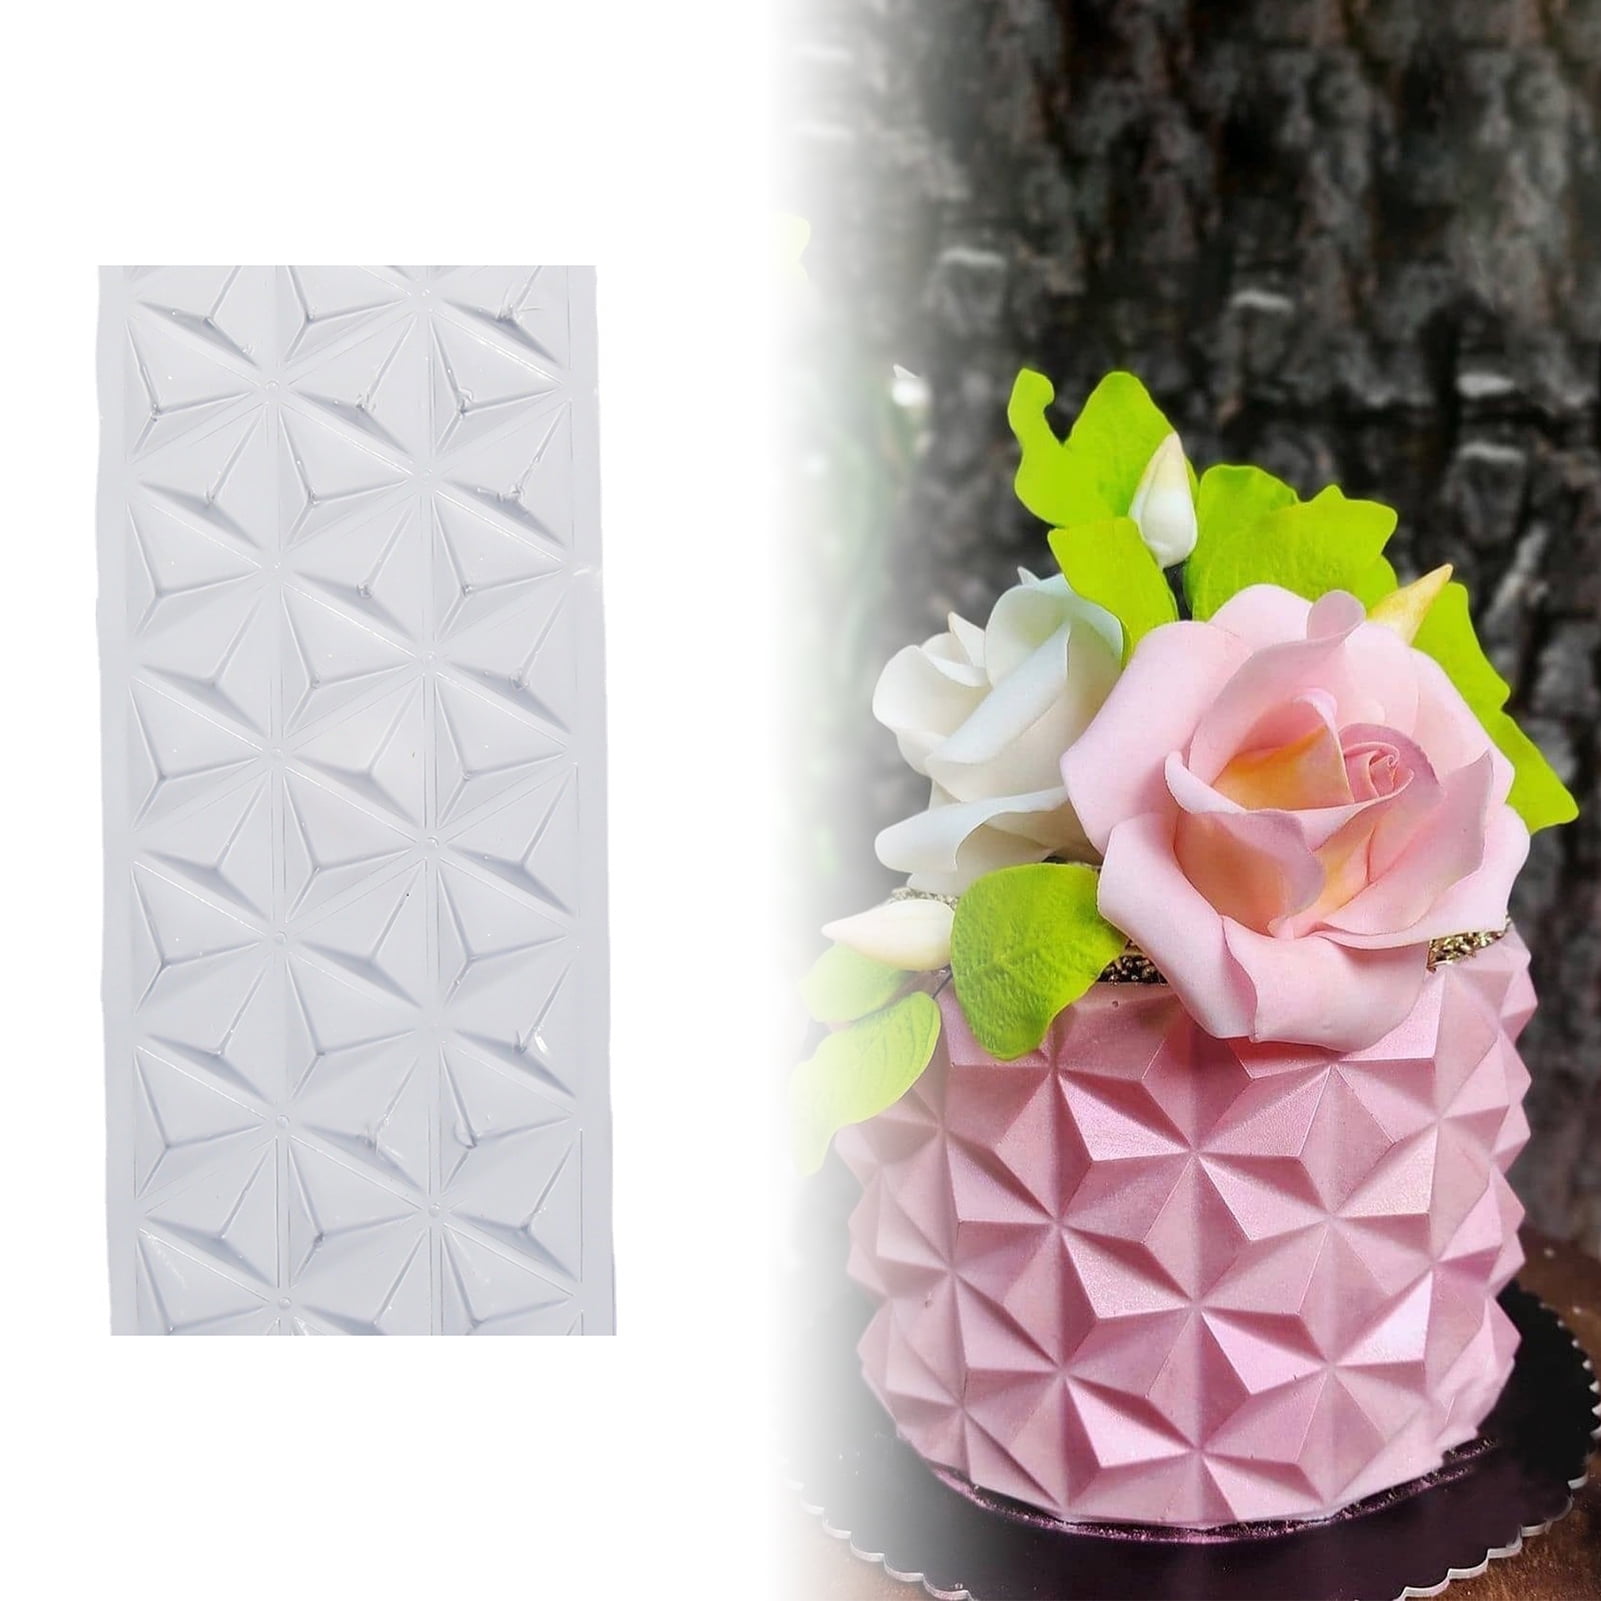 3D Diamond Pattern Cake Stencils Cake Decorating Tool Plastic Lace Cake  Border Mould Template DIY Chocolate Mousse Mold Bakeware